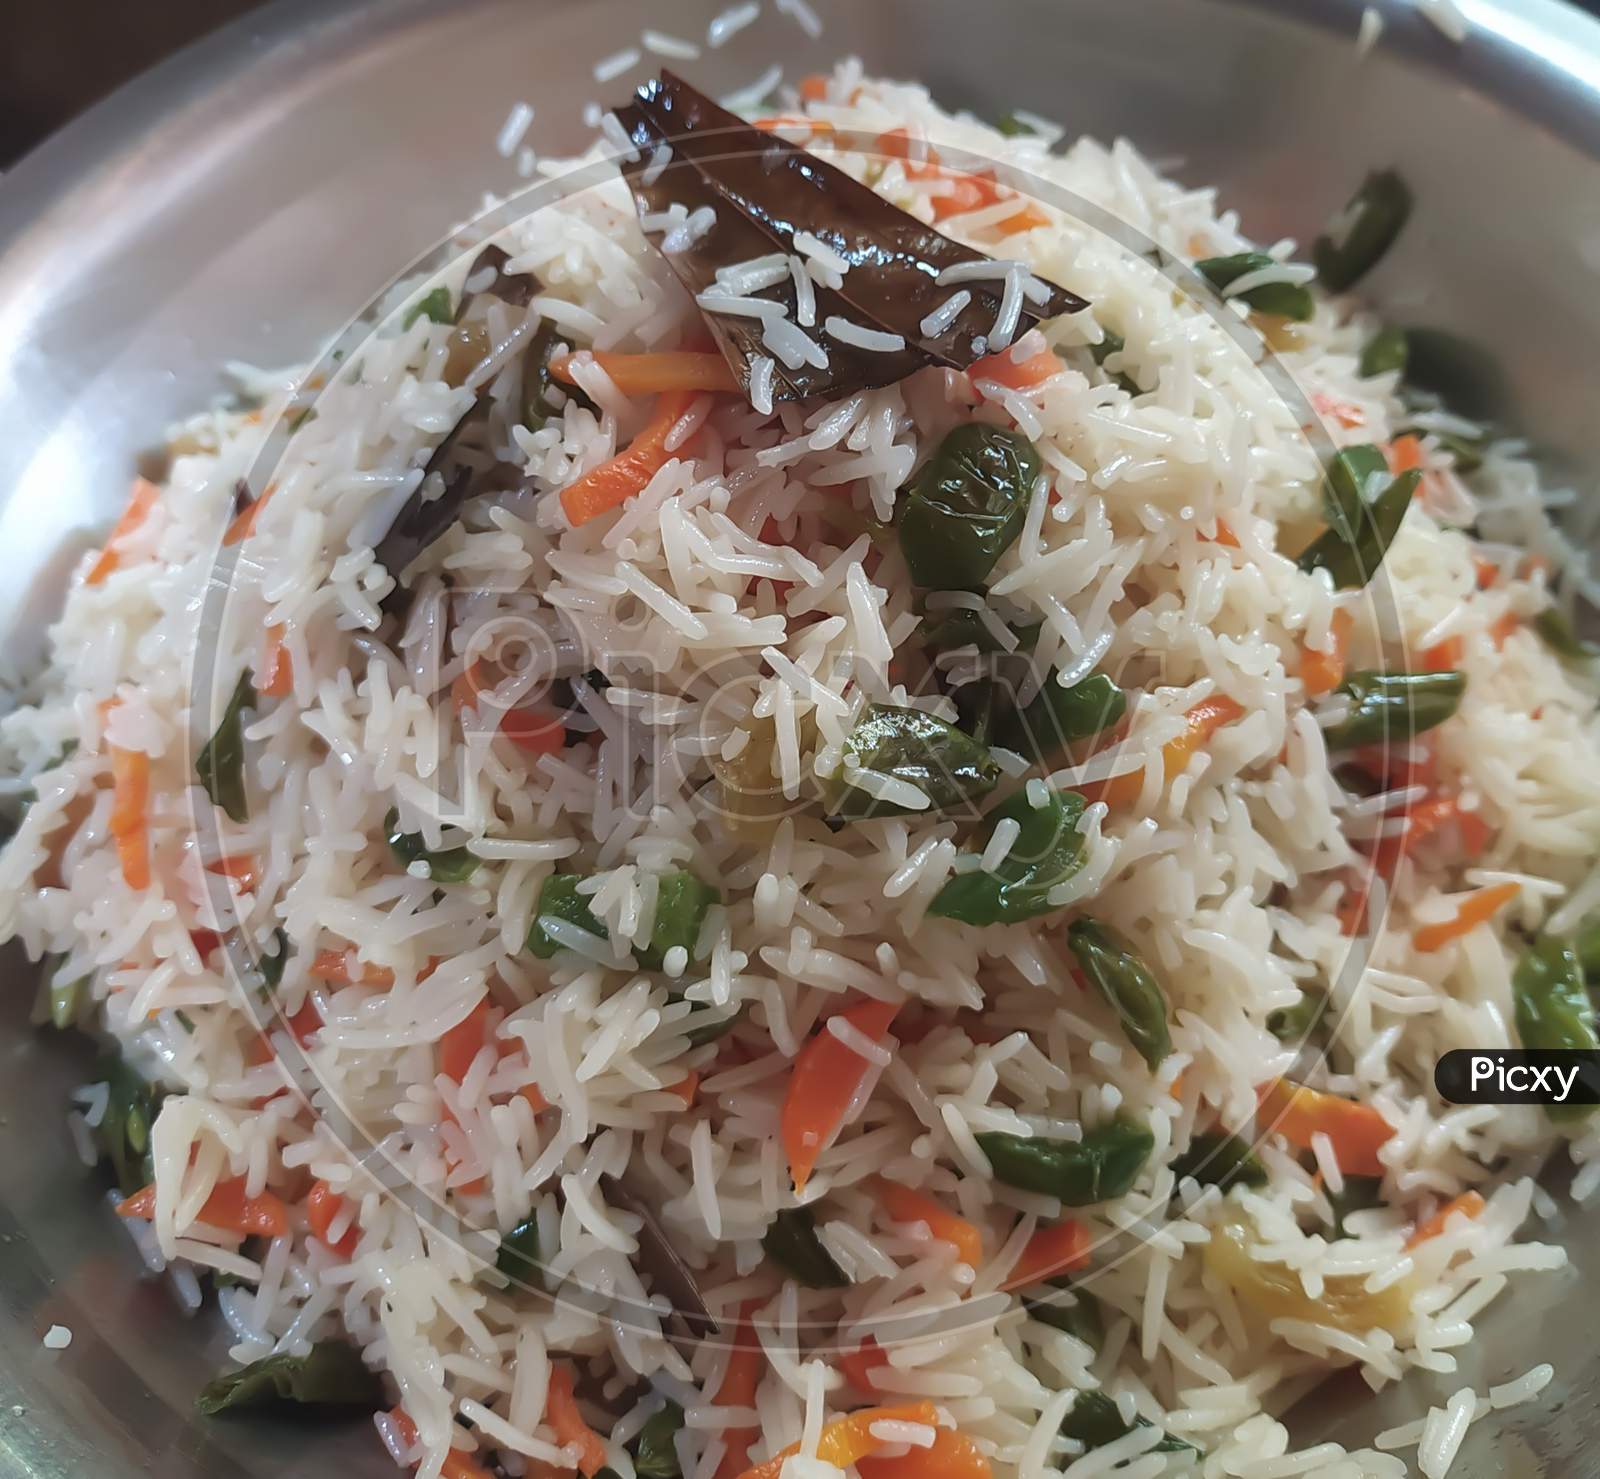 Bolide rice, Fride rice, food, lunch, boiled rice top view